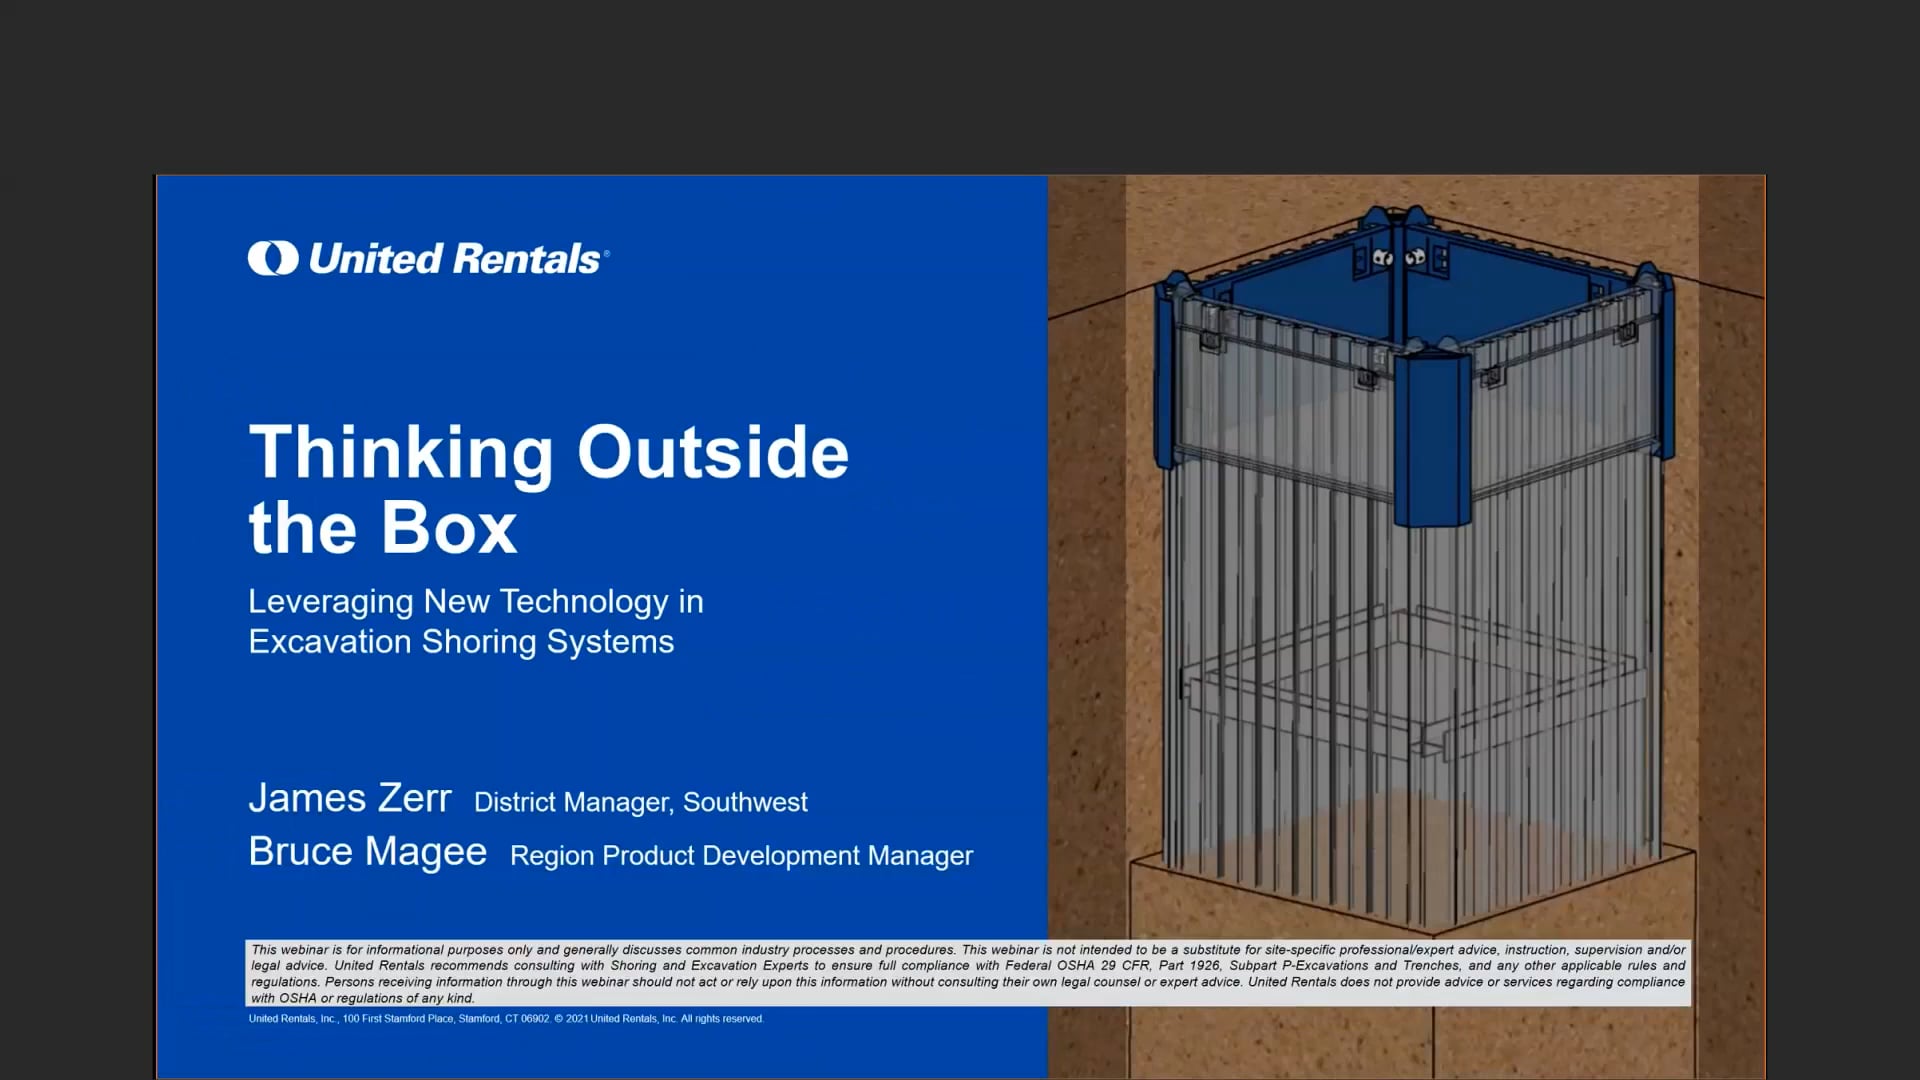 Thinking Outside the Box: 
Leveraging New Technology in Excavation Shoring Systems